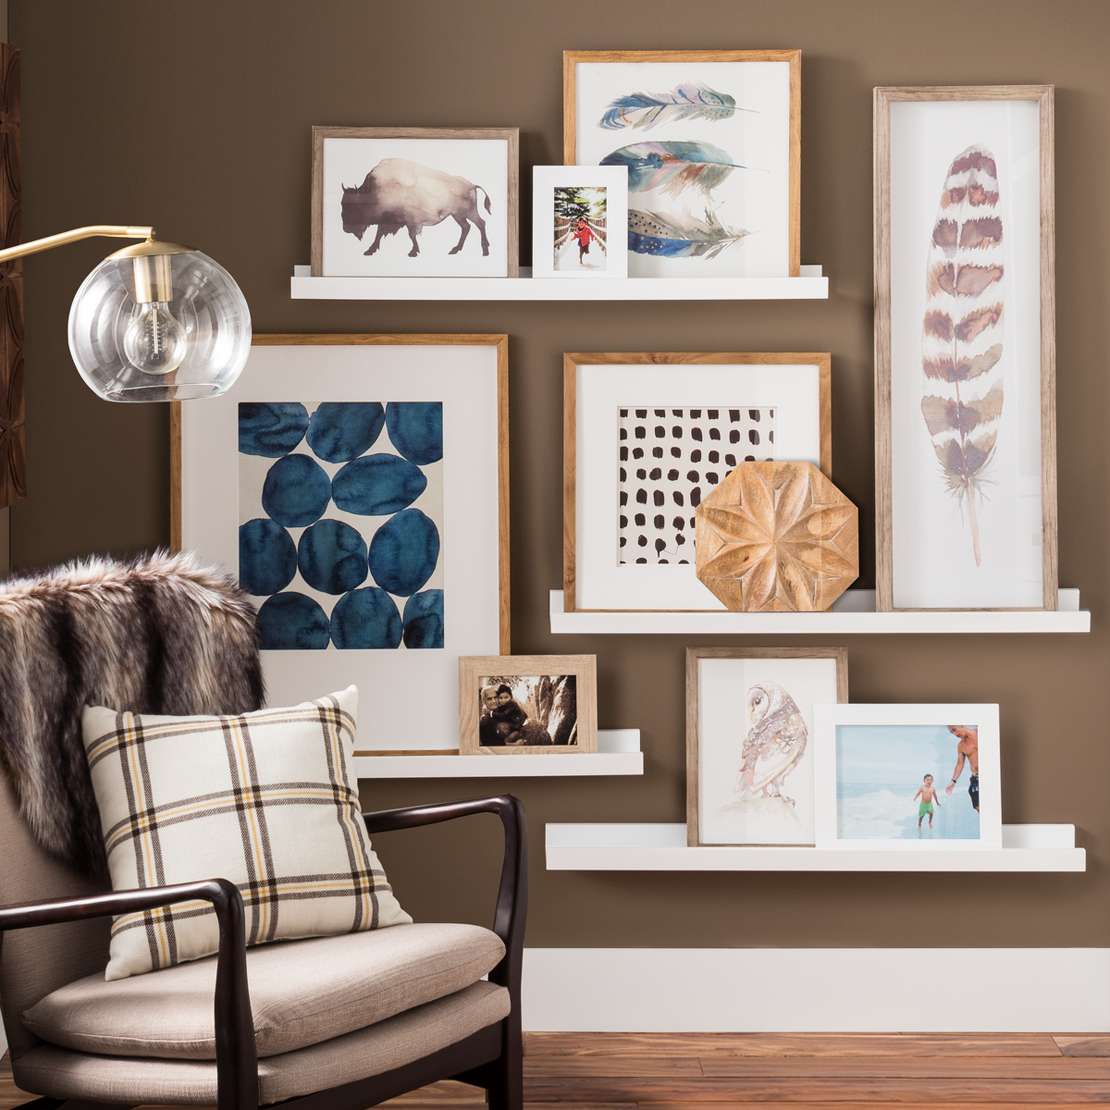 Gallery Wall Idea from Target